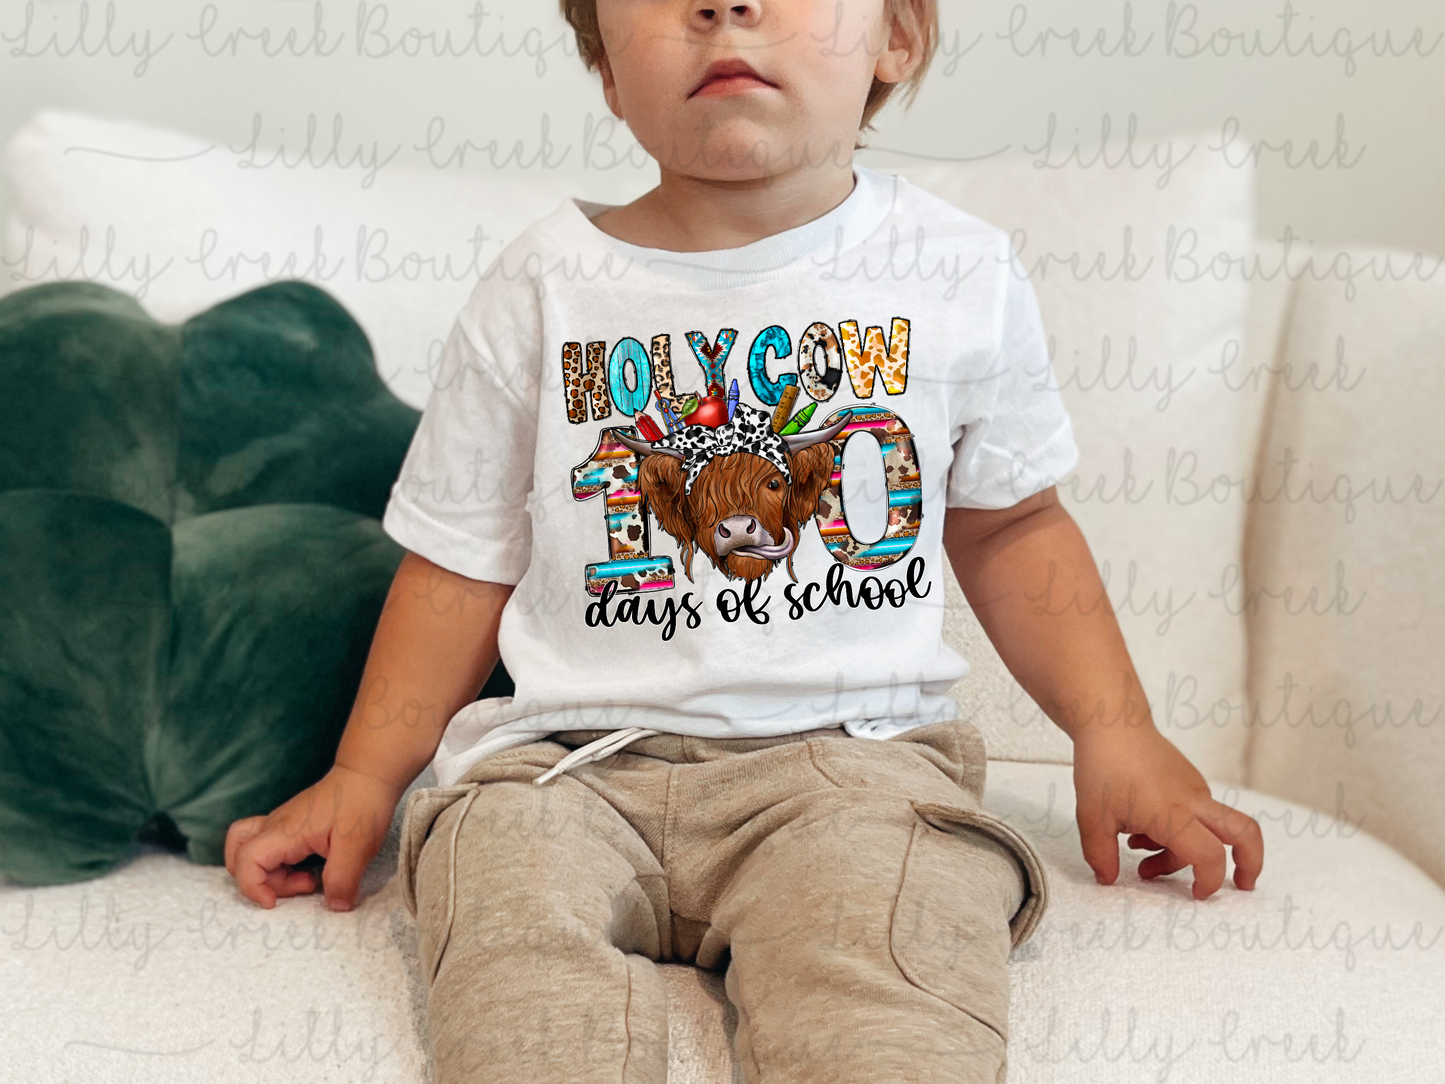 Holy Cow 100 Days of School Tee